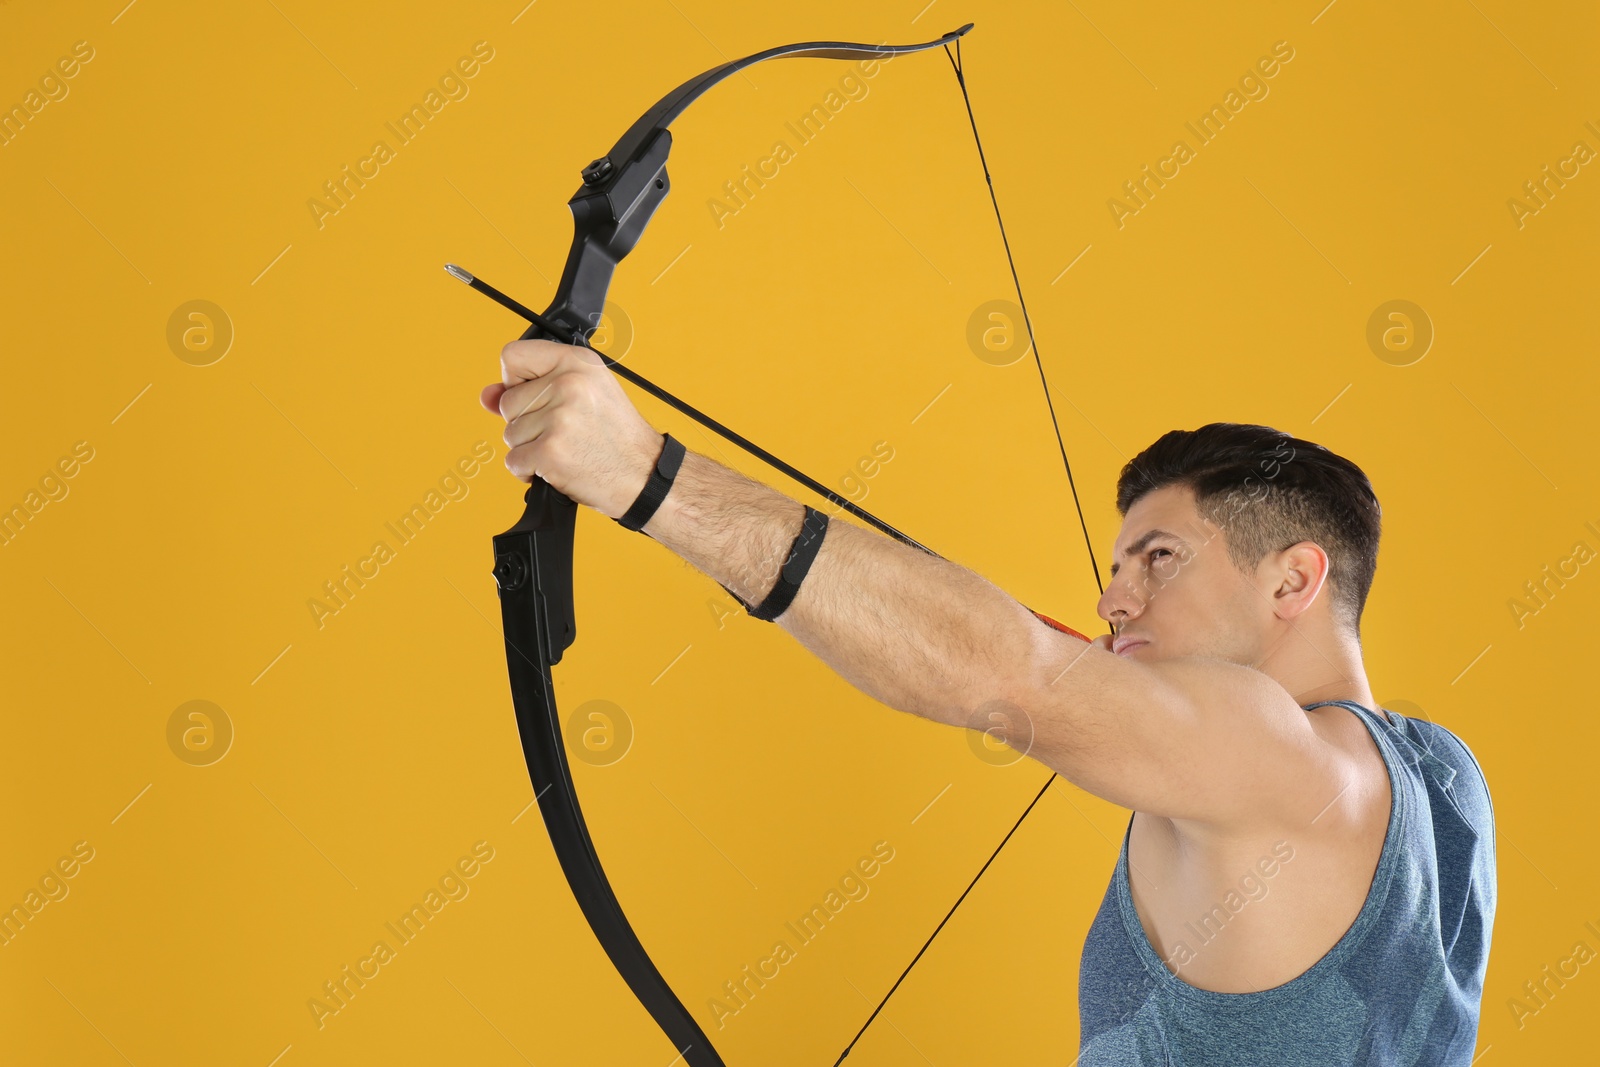 Photo of Man with bow and arrow practicing archery on yellow background